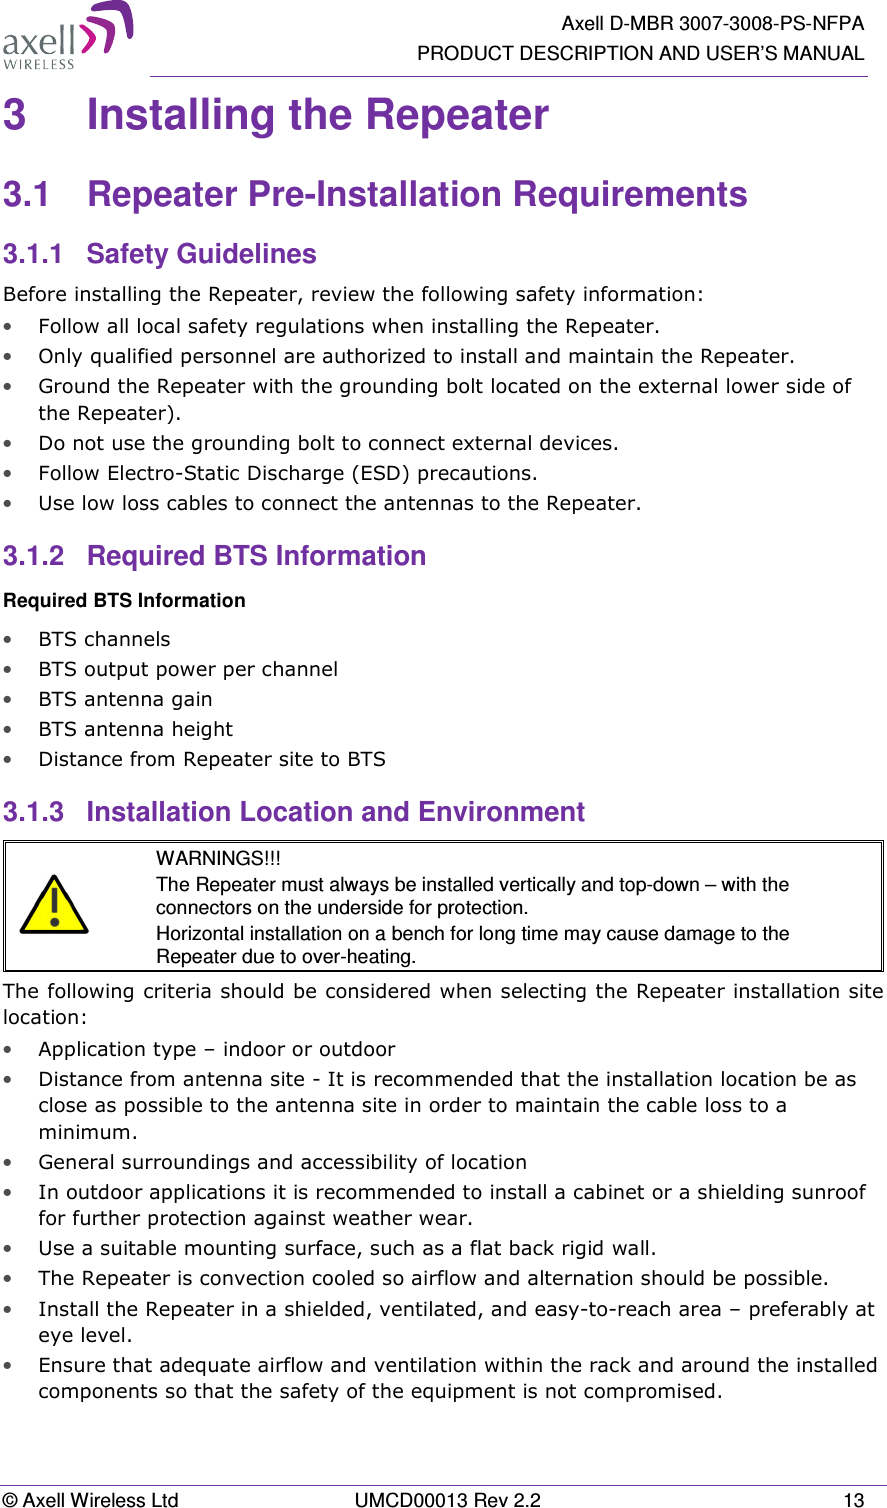   Axell D-MBR 3007-3008-PS-NFPA PRODUCT DESCRIPTION AND USER’S MANUAL © Axell Wireless Ltd  UMCD00013 Rev 2.2  13 3  Installing the Repeater  3.1  Repeater Pre-Installation Requirements 3.1.1  Safety Guidelines Before installing the Repeater, review the following safety information:  • Follow all local safety regulations when installing the Repeater. • Only qualified personnel are authorized to install and maintain the Repeater. • Ground the Repeater with the grounding bolt located on the external lower side of the Repeater). • Do not use the grounding bolt to connect external devices. • Follow Electro-Static Discharge (ESD) precautions. • Use low loss cables to connect the antennas to the Repeater. 3.1.2  Required BTS Information Required BTS Information • BTS channels • BTS output power per channel • BTS antenna gain • BTS antenna height  • Distance from Repeater site to BTS 3.1.3  Installation Location and Environment   WARNINGS!!! The Repeater must always be installed vertically and top-down – with the connectors on the underside for protection.  Horizontal installation on a bench for long time may cause damage to the Repeater due to over-heating. The following criteria should be considered when selecting the Repeater installation site location: • Application type – indoor or outdoor • Distance from antenna site - It is recommended that the installation location be as close as possible to the antenna site in order to maintain the cable loss to a minimum. • General surroundings and accessibility of location • In outdoor applications it is recommended to install a cabinet or a shielding sunroof for further protection against weather wear. • Use a suitable mounting surface, such as a flat back rigid wall. • The Repeater is convection cooled so airflow and alternation should be possible. • Install the Repeater in a shielded, ventilated, and easy-to-reach area – preferably at eye level. • Ensure that adequate airflow and ventilation within the rack and around the installed components so that the safety of the equipment is not compromised. 